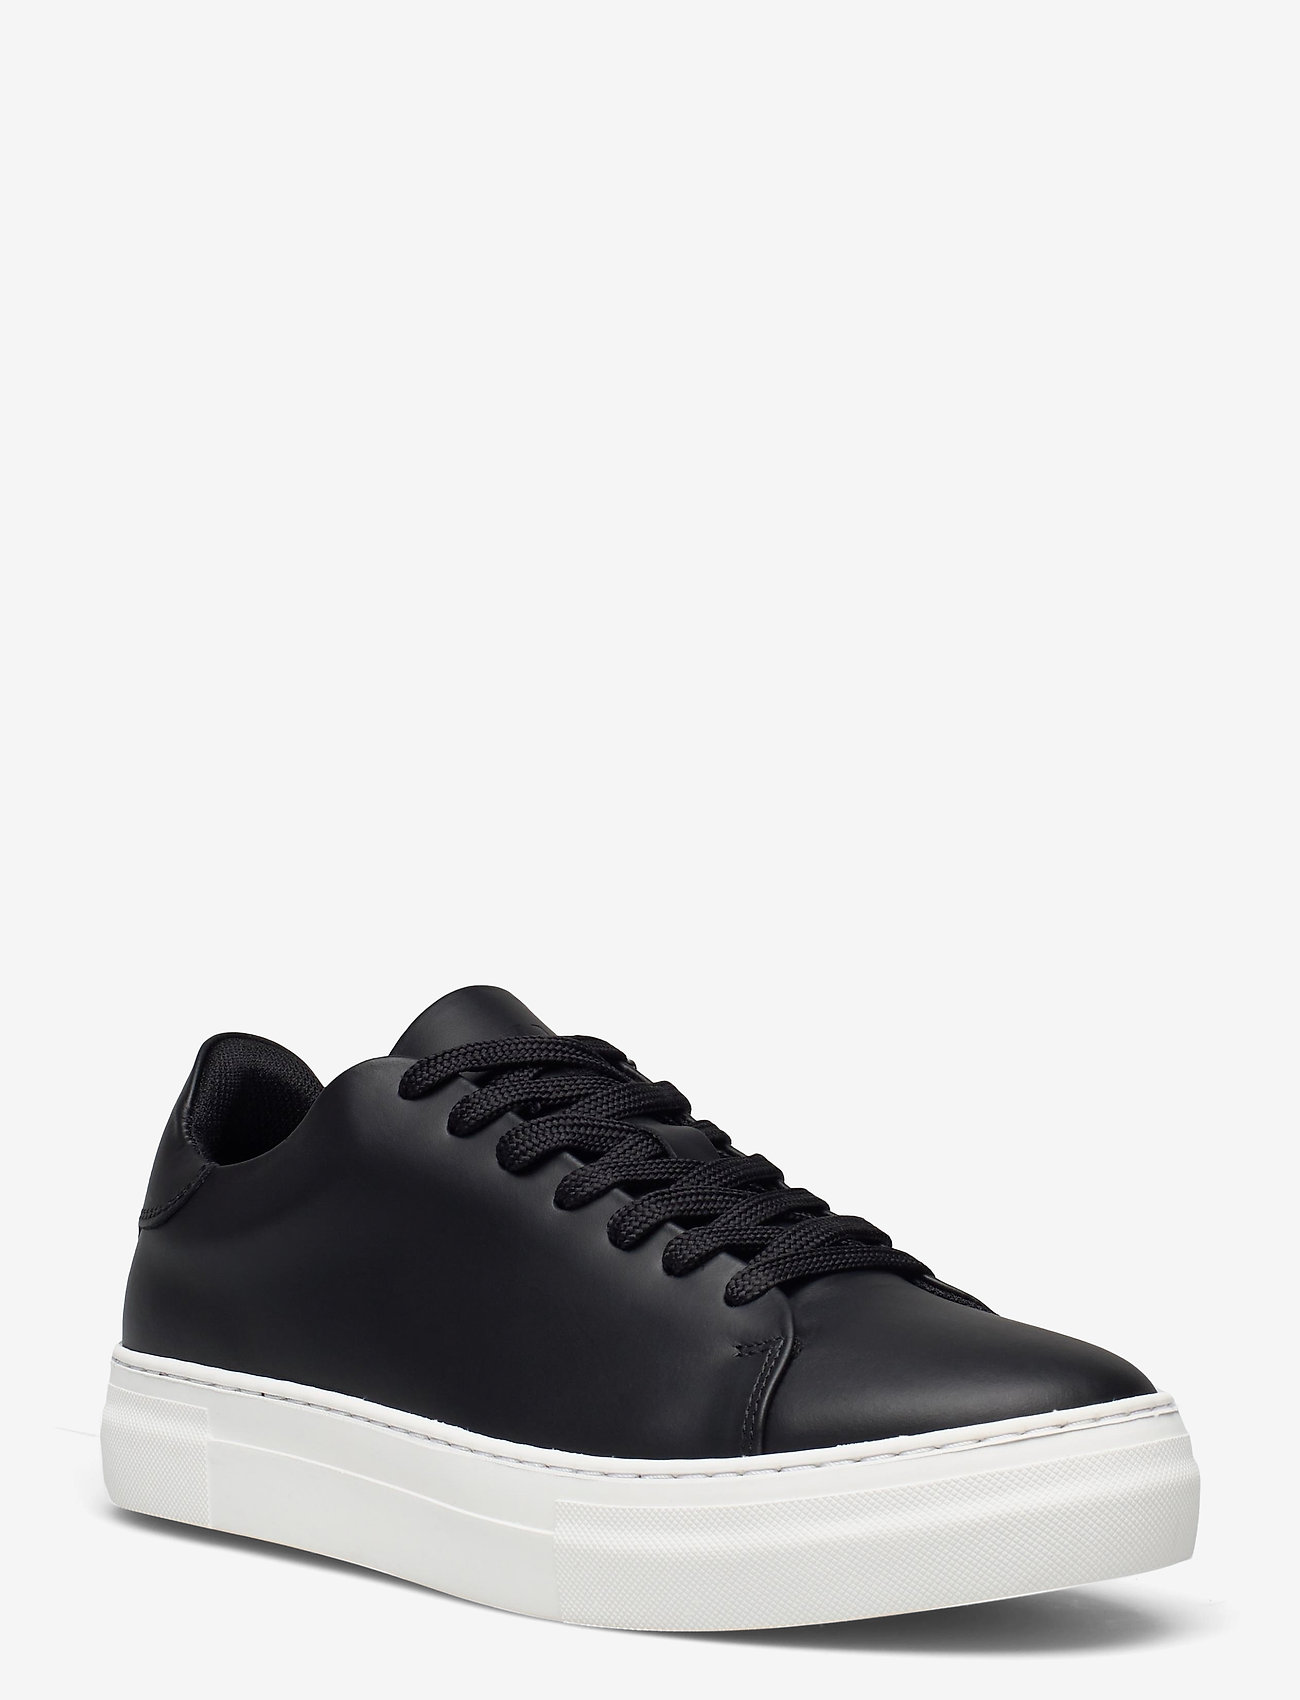 Selected Homme - SLHDAVID CHUNKY LEATHER SNEAKER NOOS O - lave sneakers - black - 0